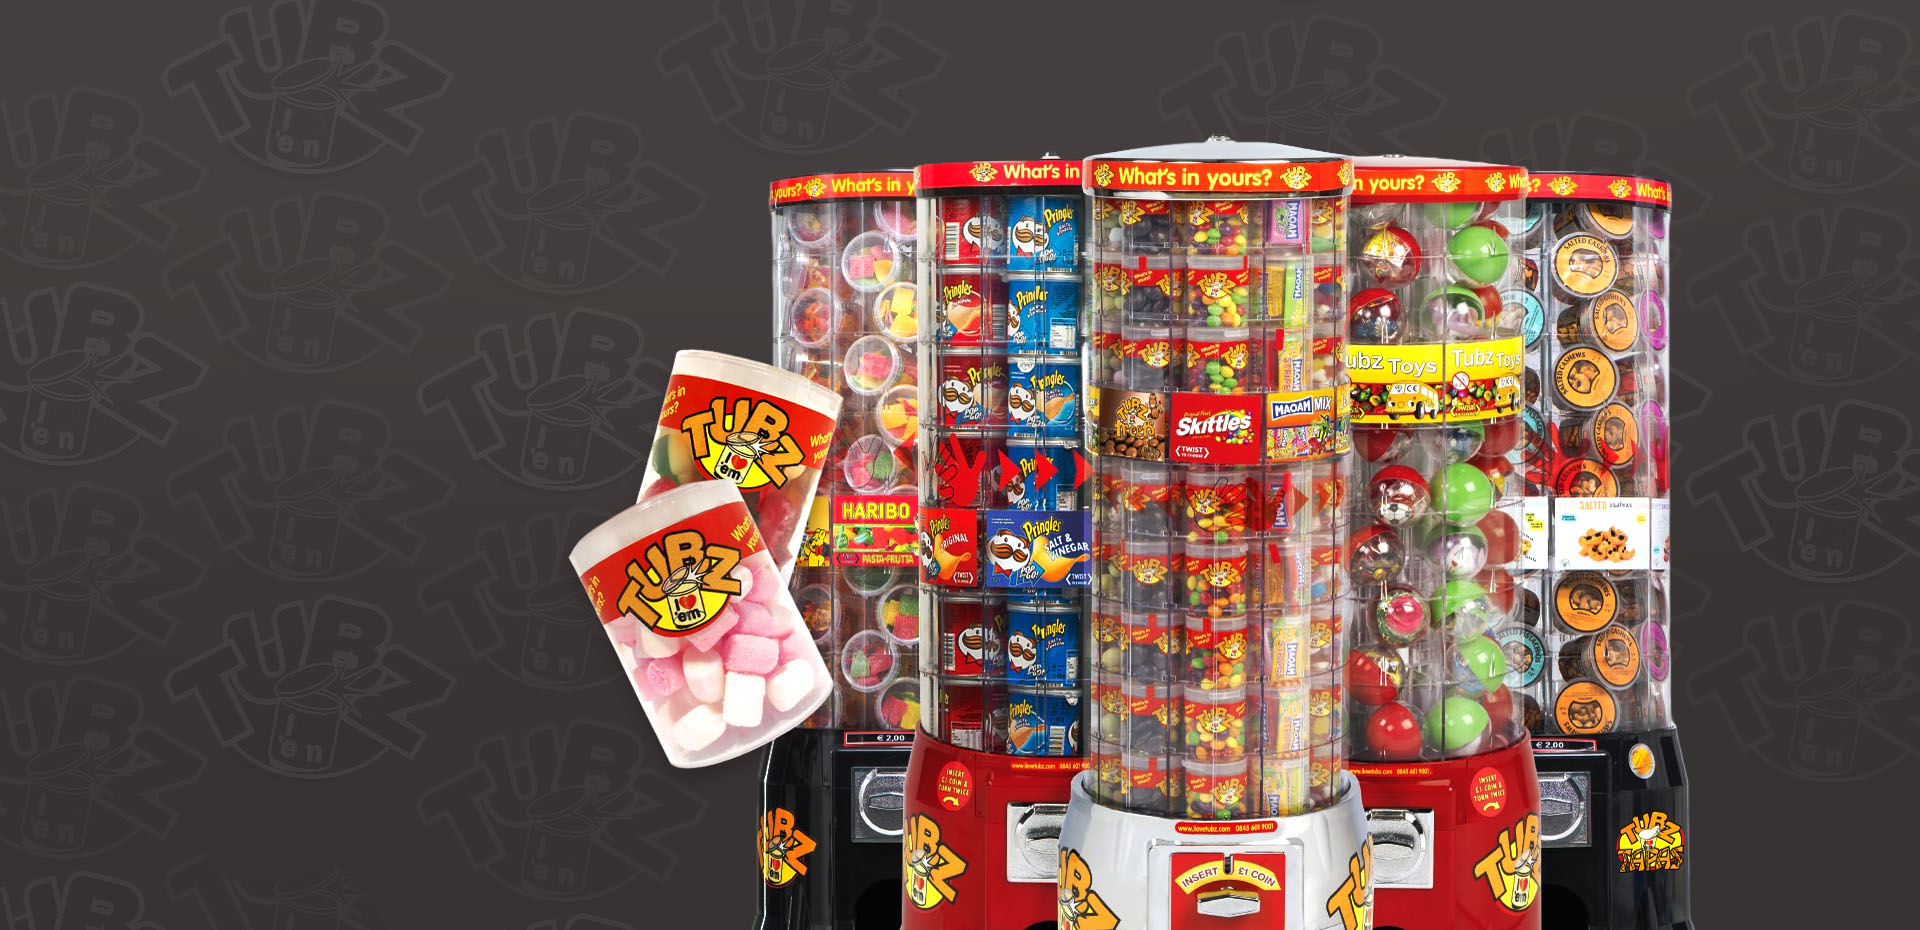 Installers Of Sweets Vending Machines For Soft Play Establishments Kettering